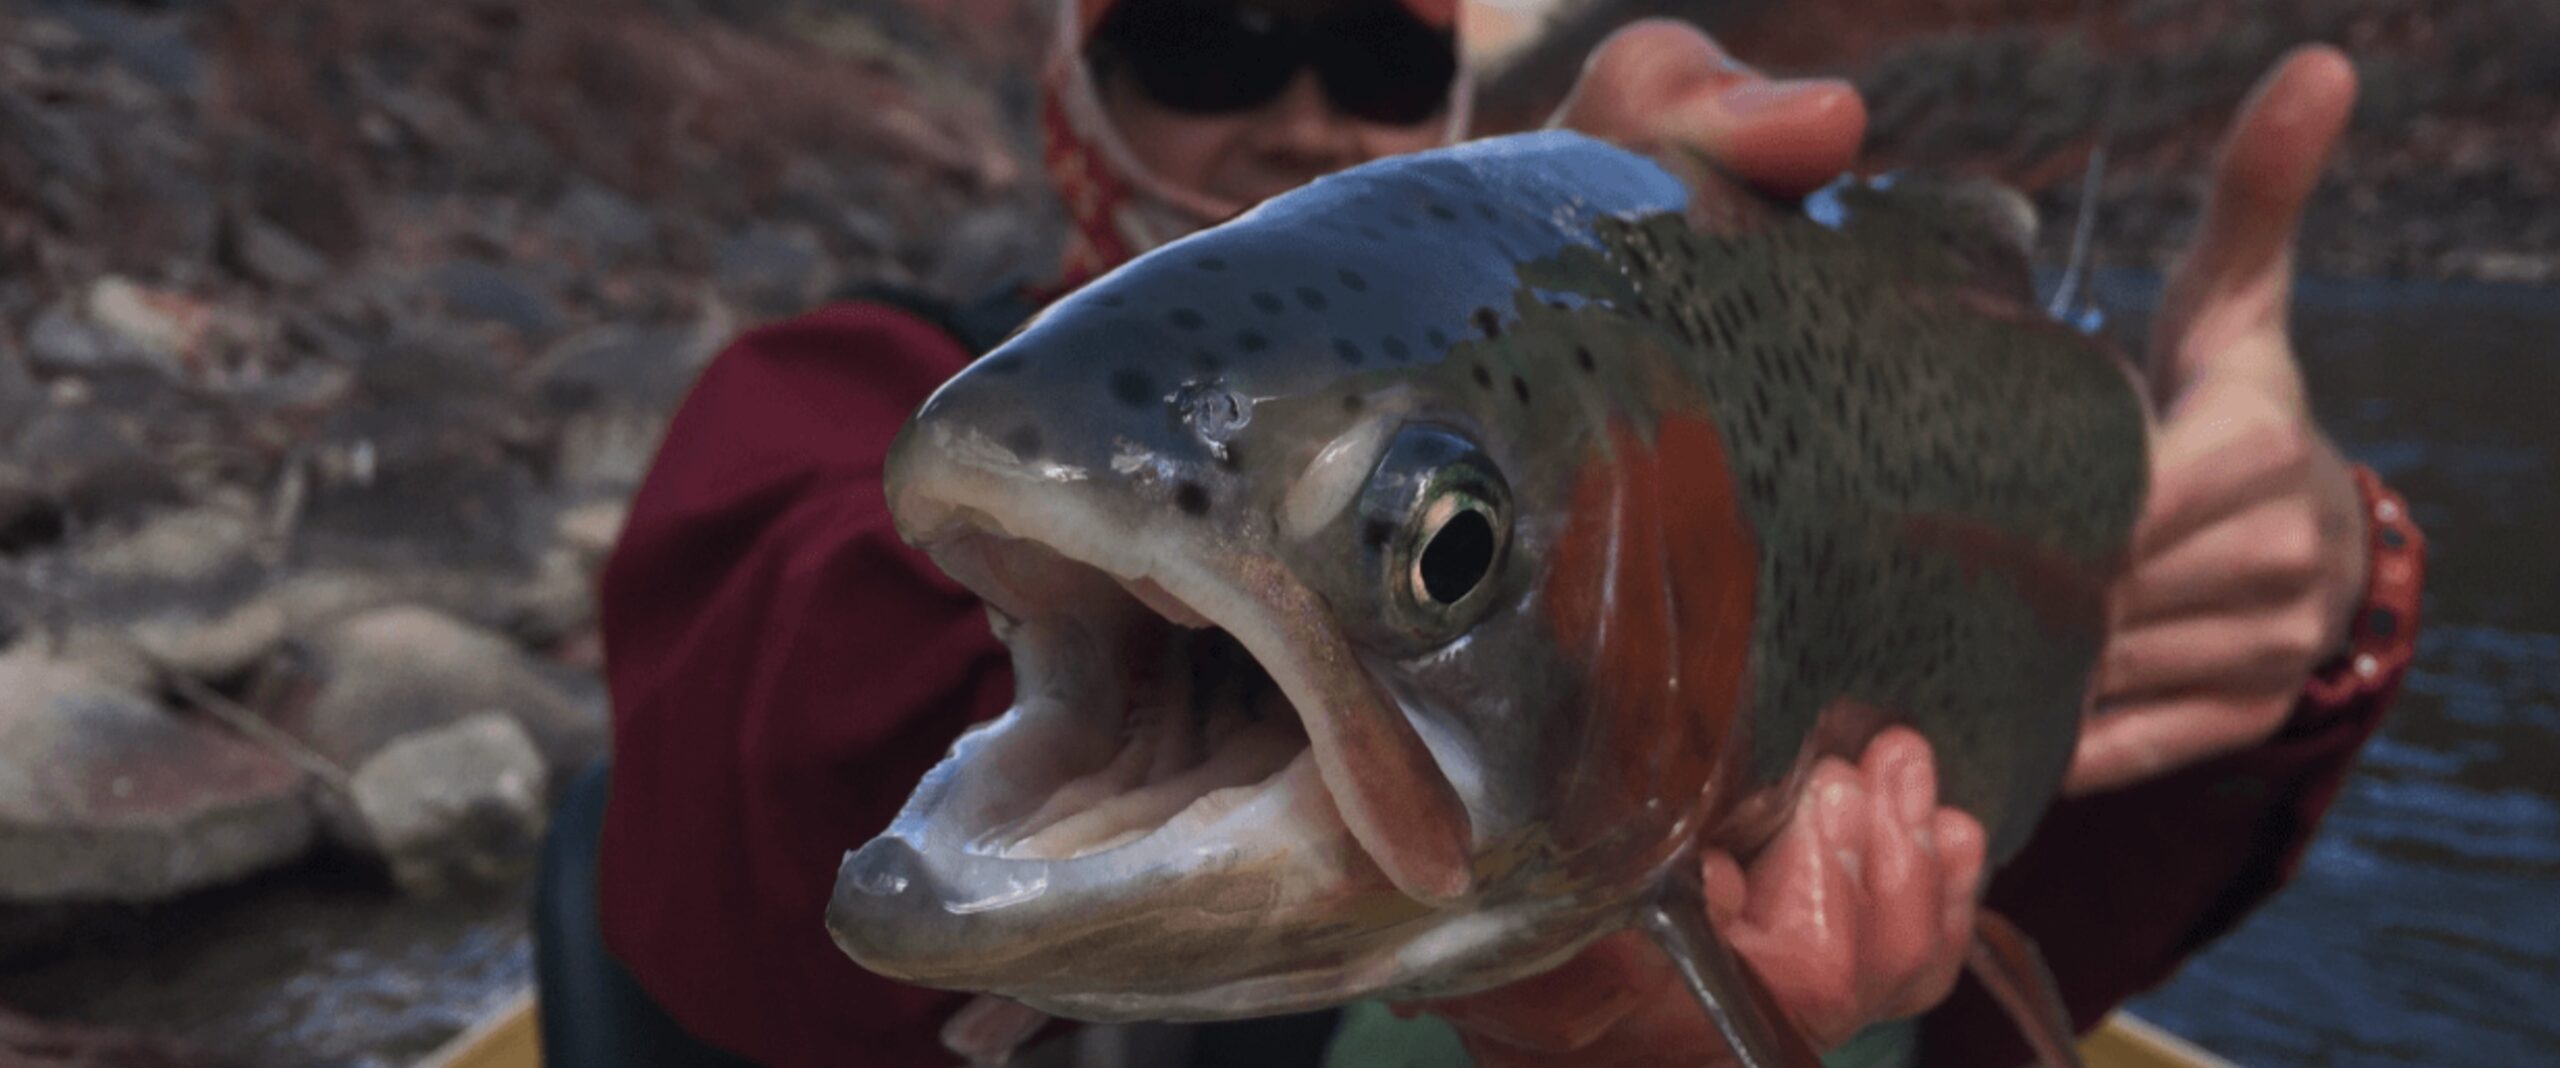 A close-up image capturing the intricate details of a trout from the Colorado River, showcasing its distinctive and beautiful spots along with vibrant, colorful scales. You can see the fisherman in the background as he holds the fish for the photo.